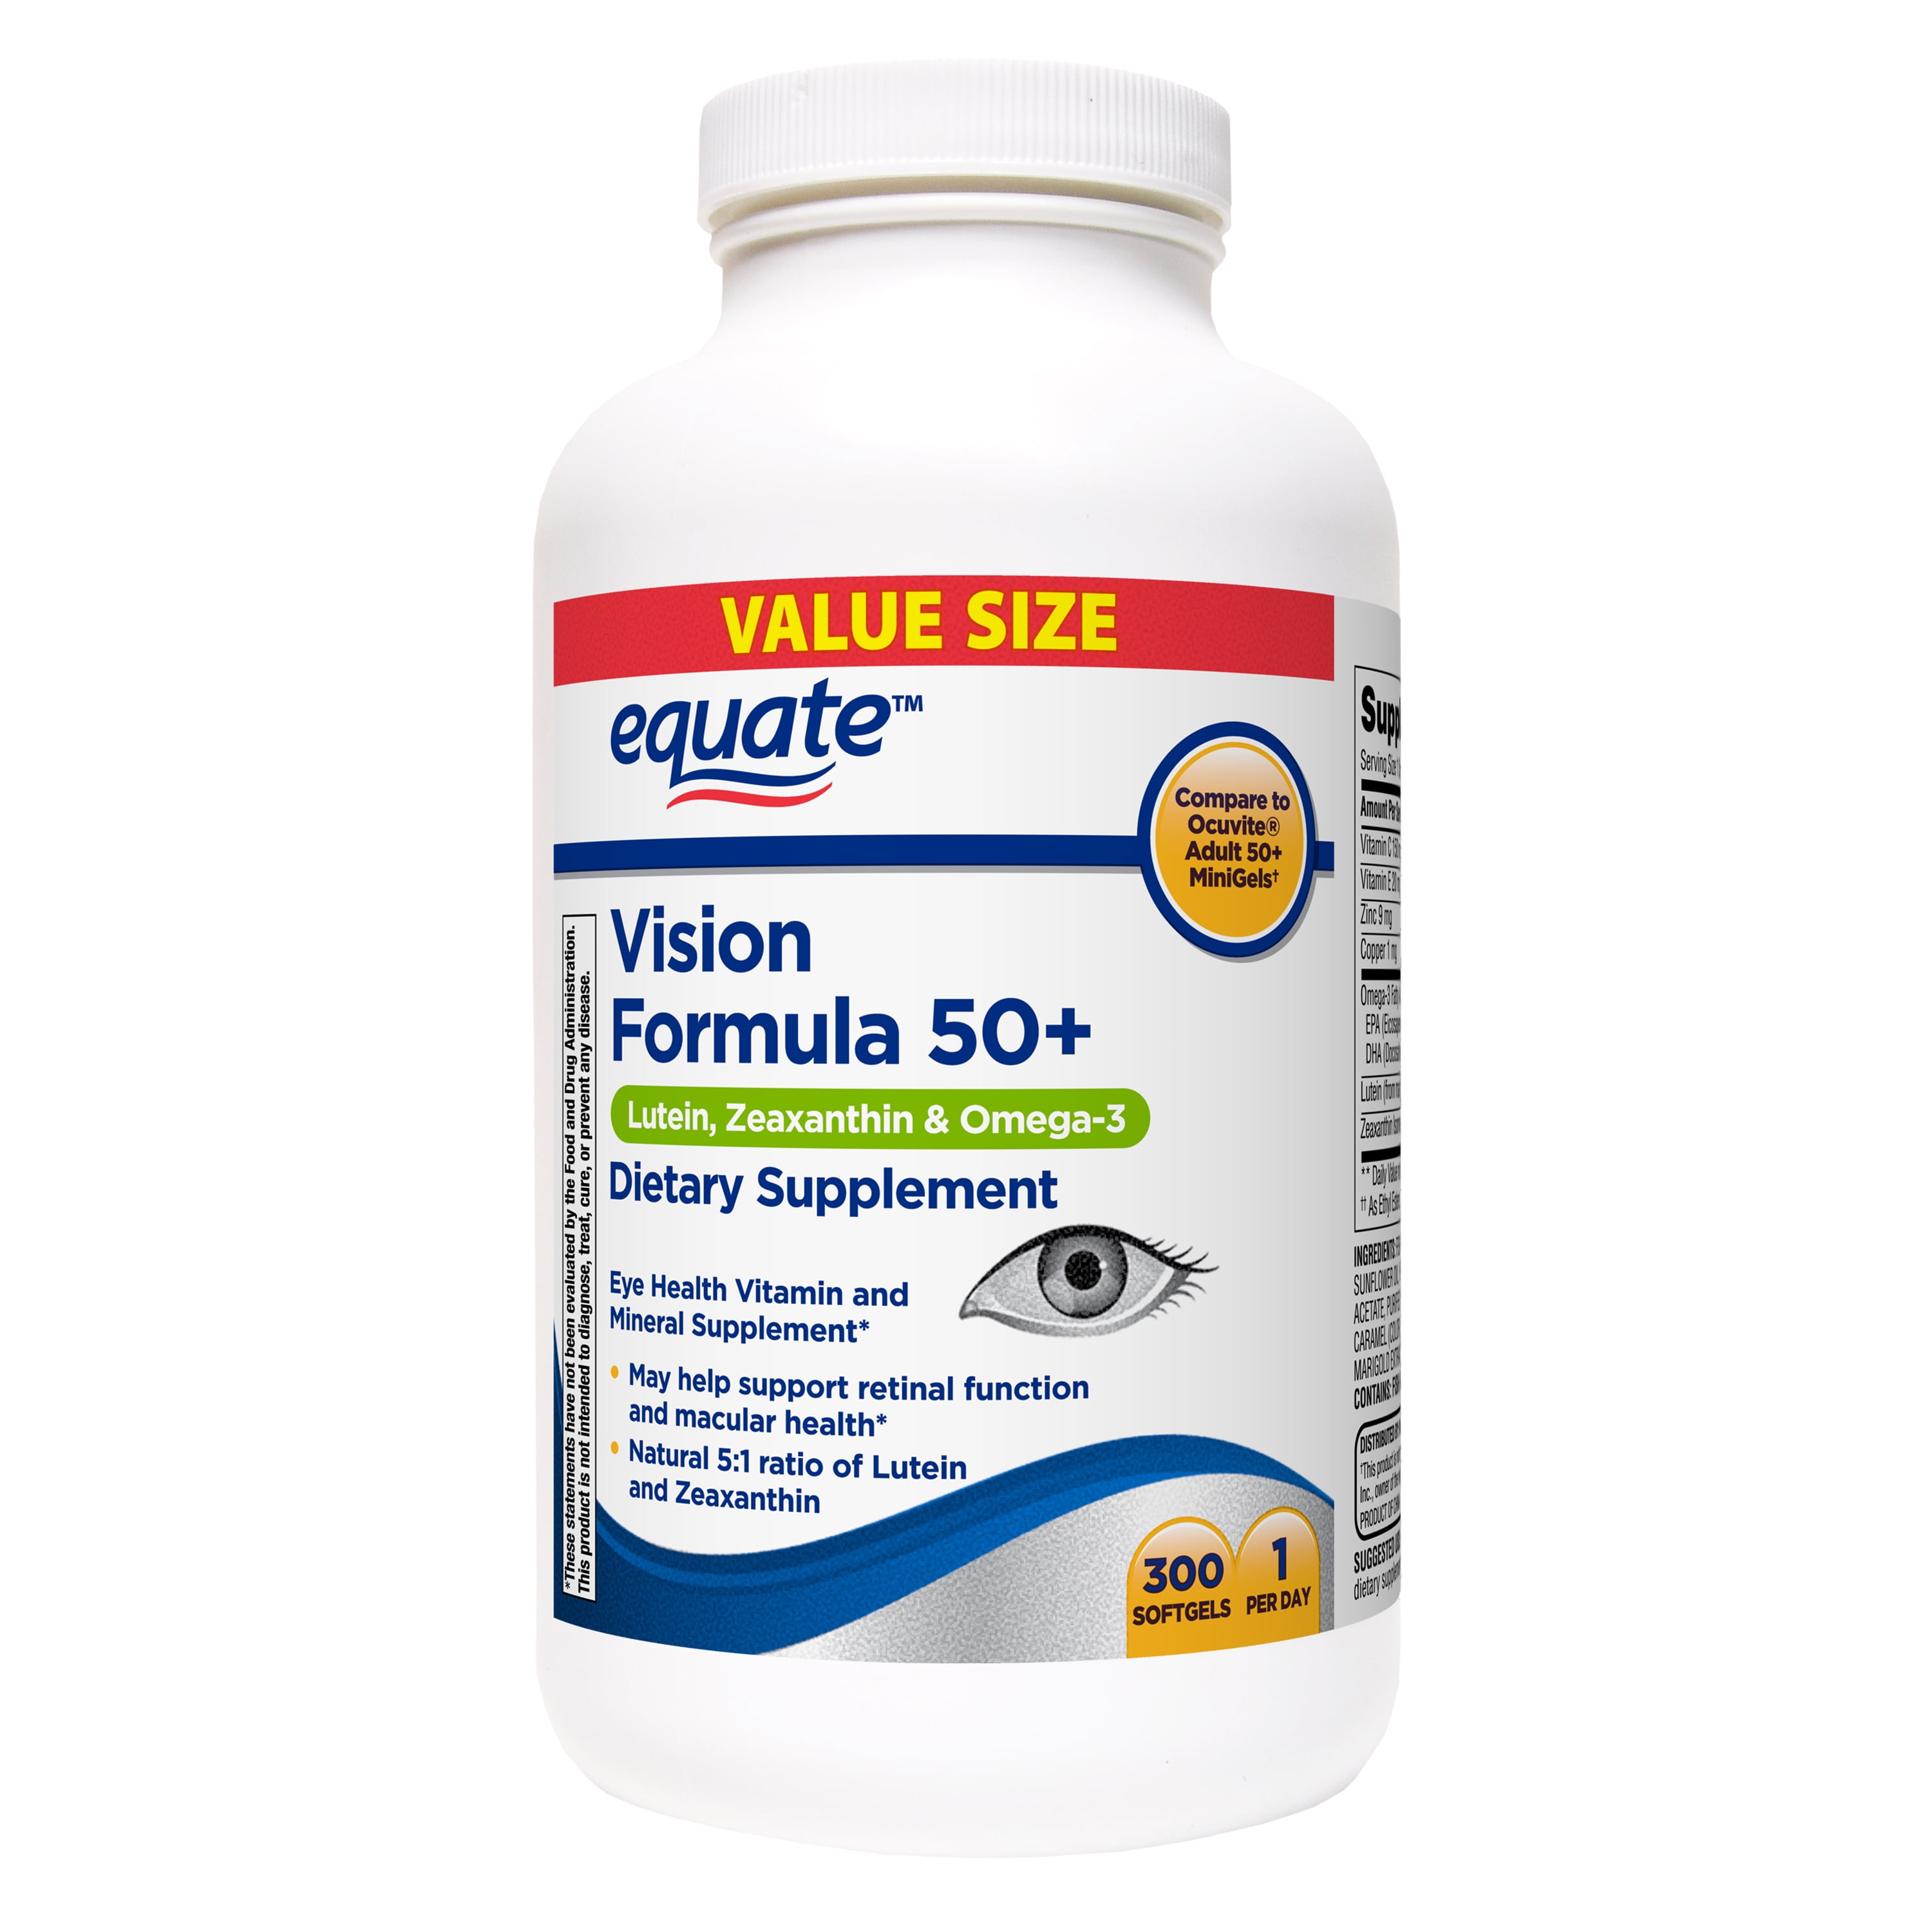 Equate Vision Formula 50+ Softgels Dietary Supplement Value Size, 300 Count